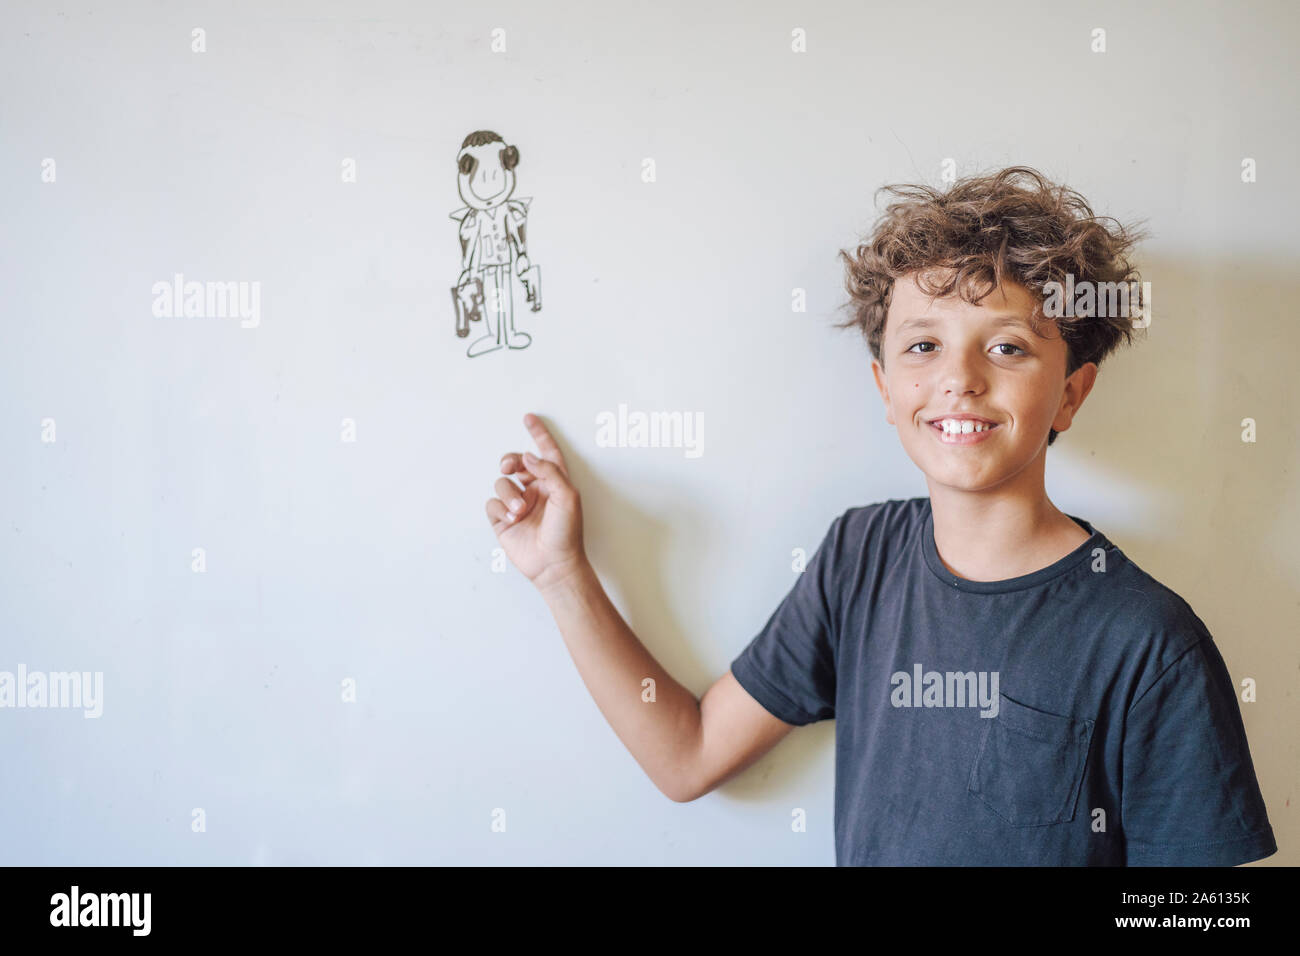 Portrait of smiling boy pointing to a drawing on a whiteboard Stock Photo